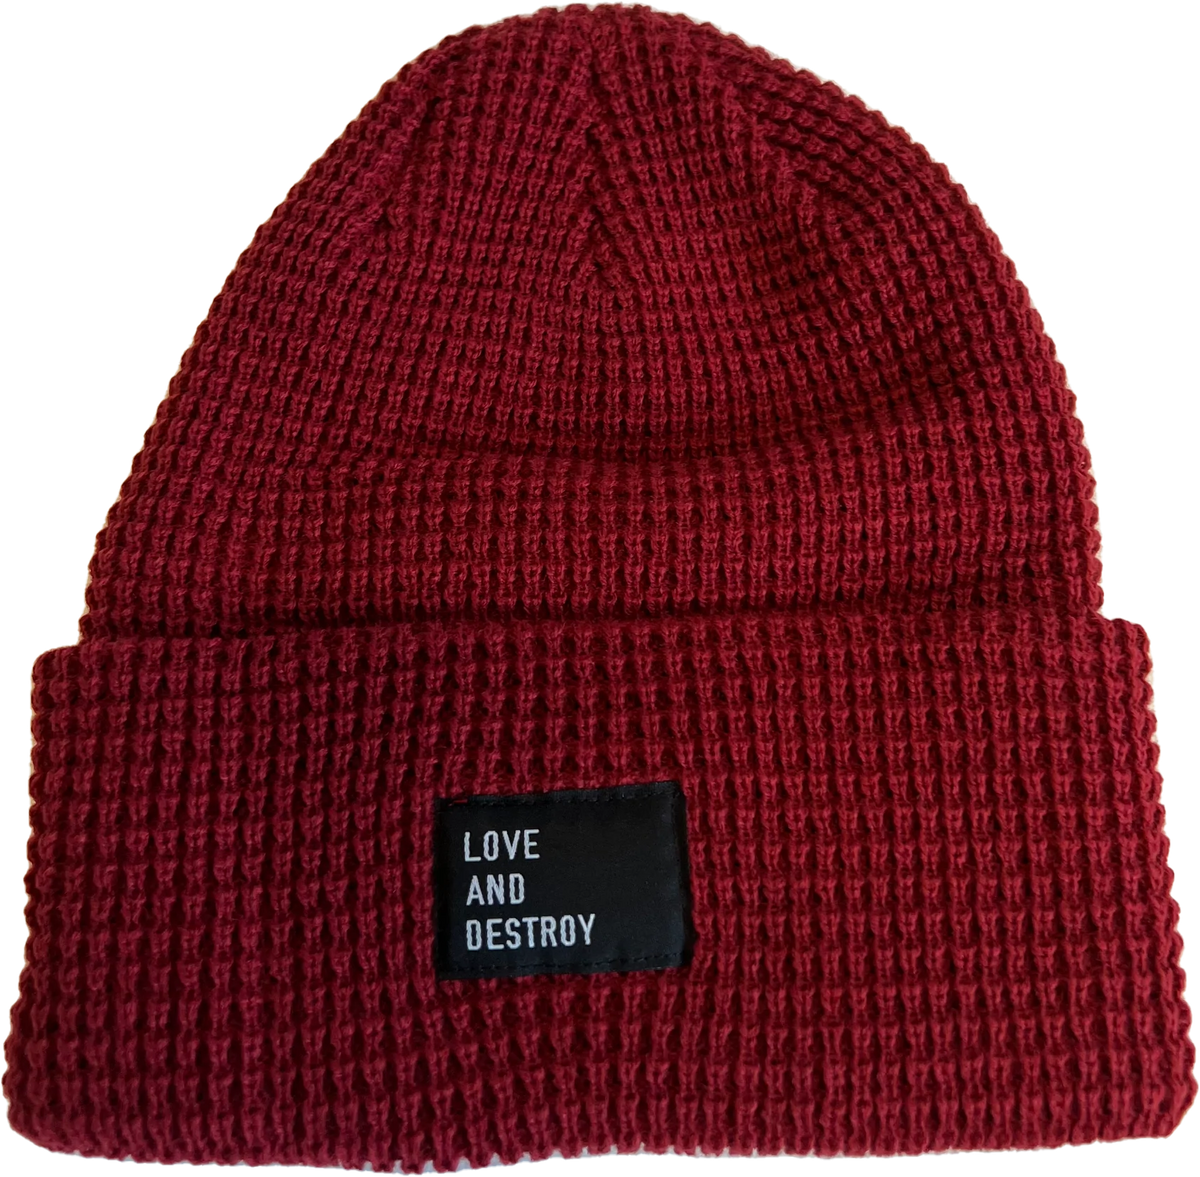 Love and Destroy Beanie